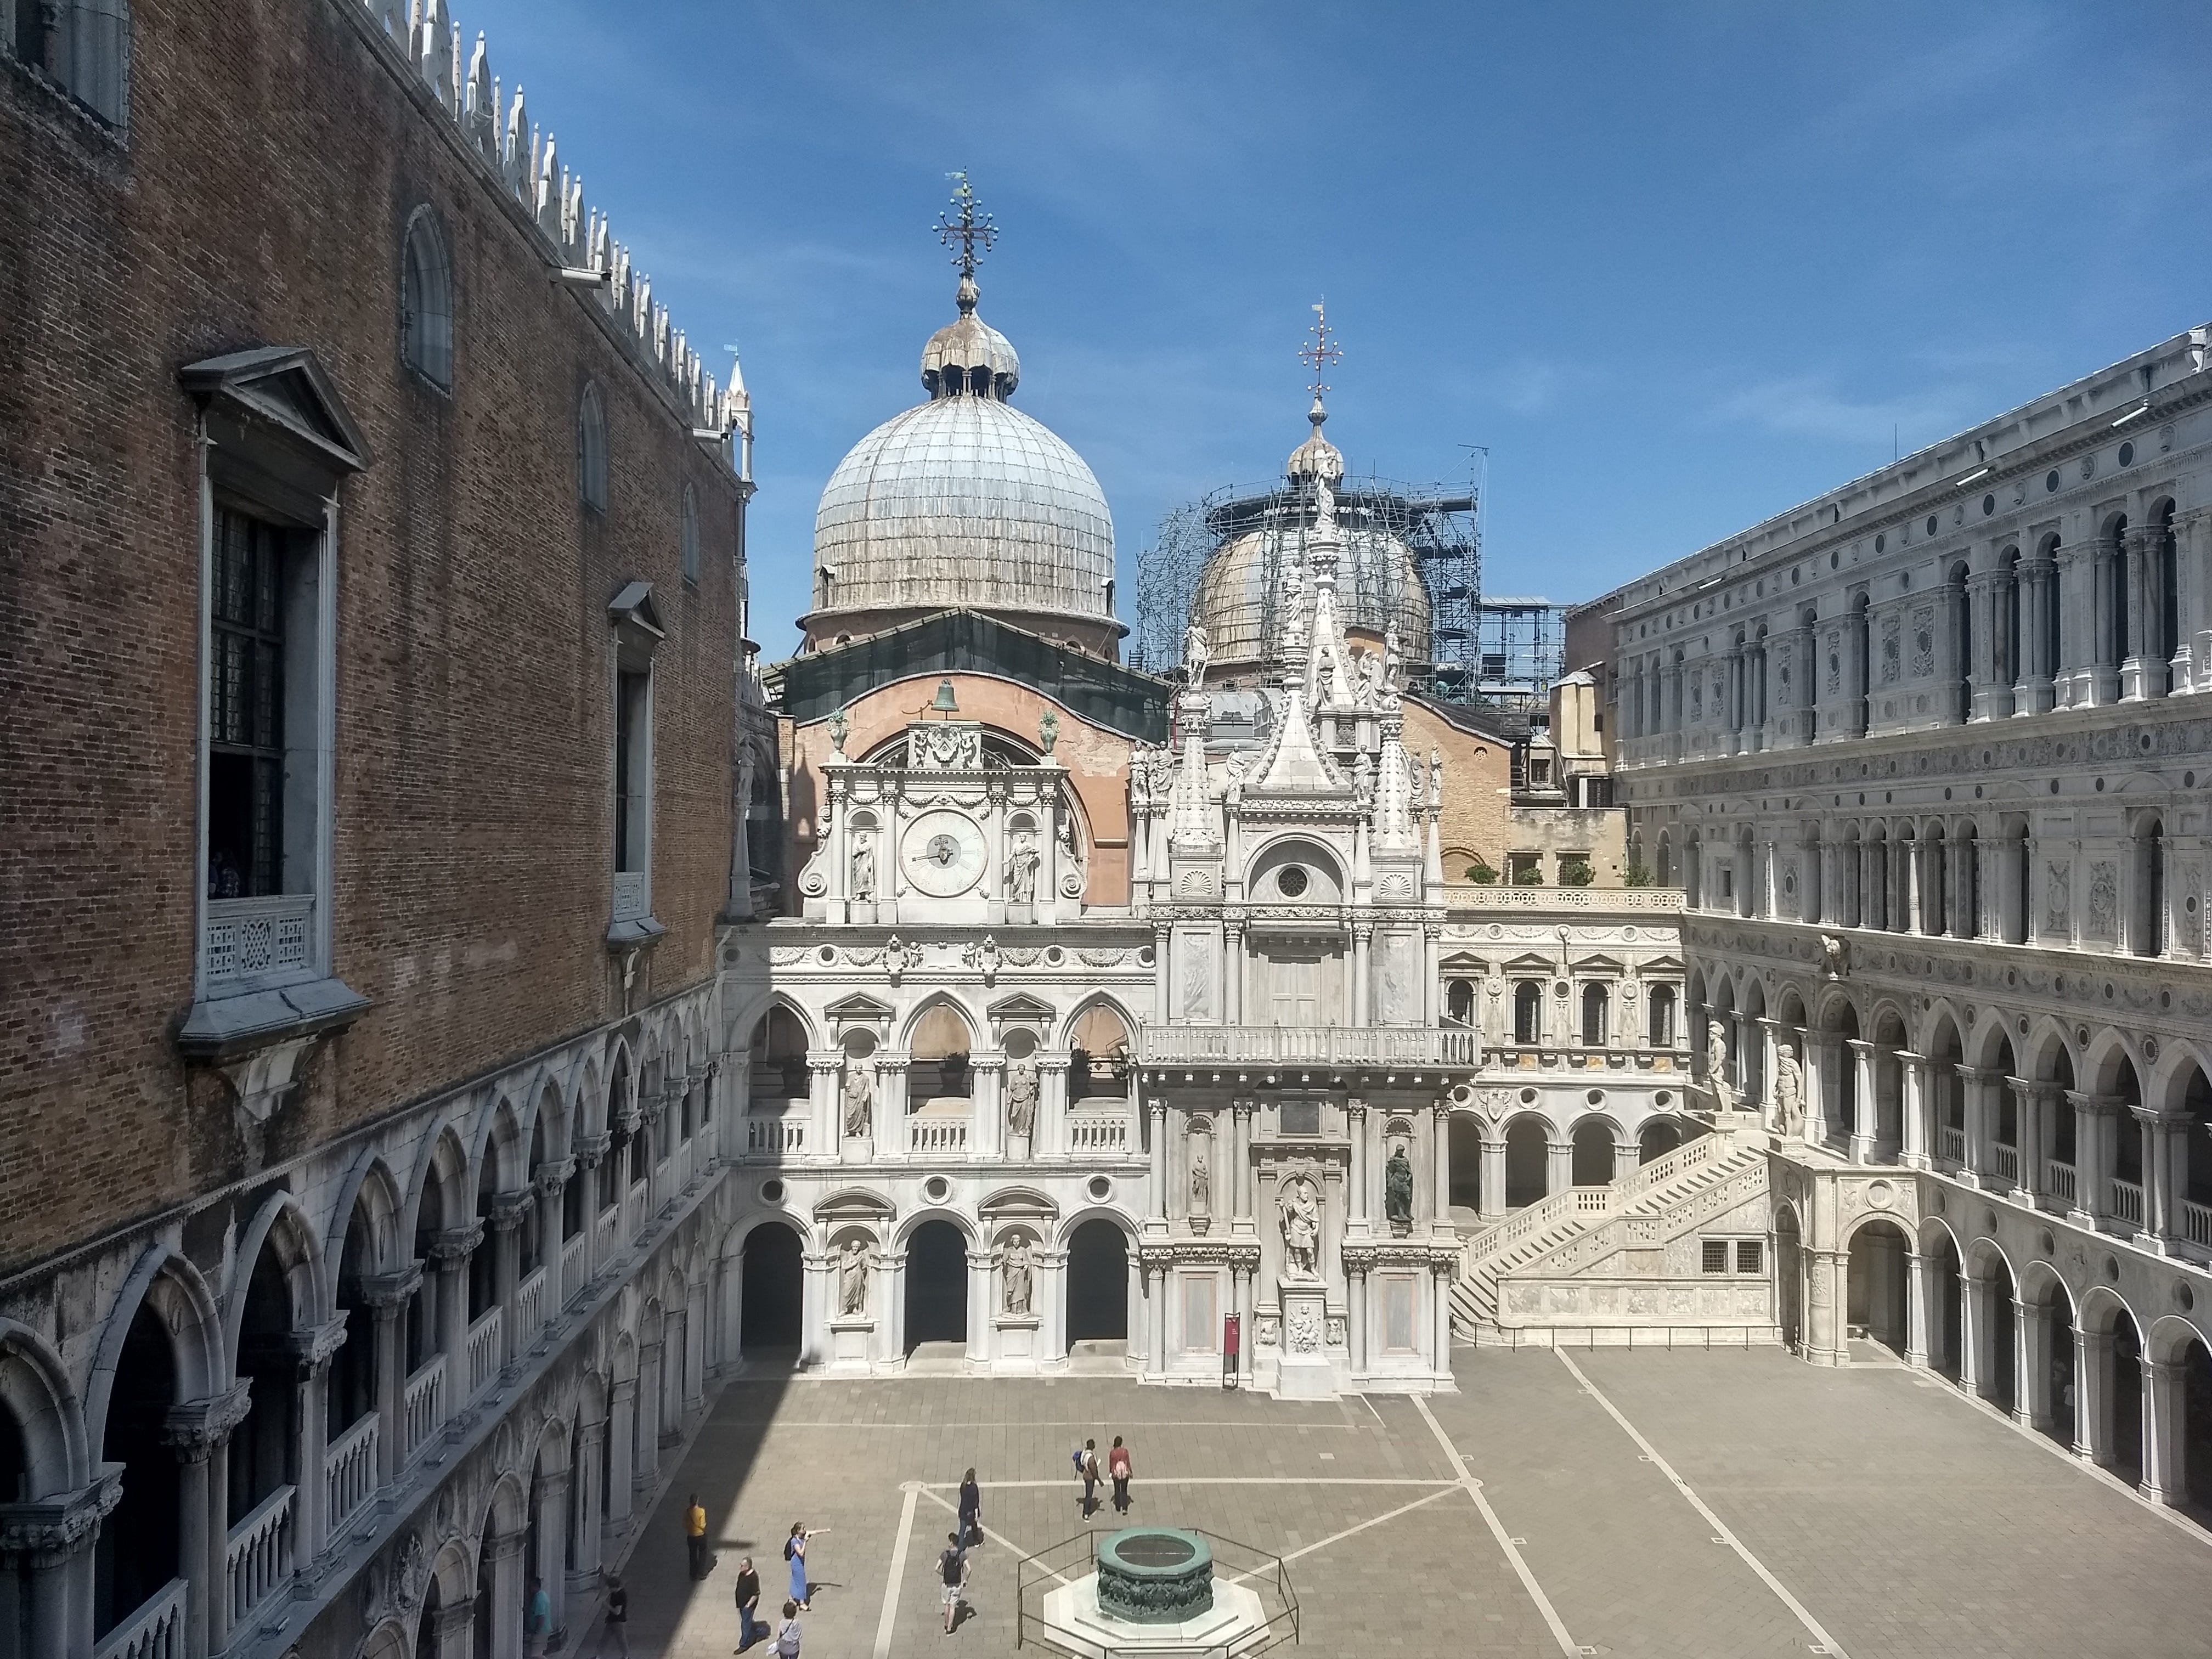 Doge’s Palace from inside